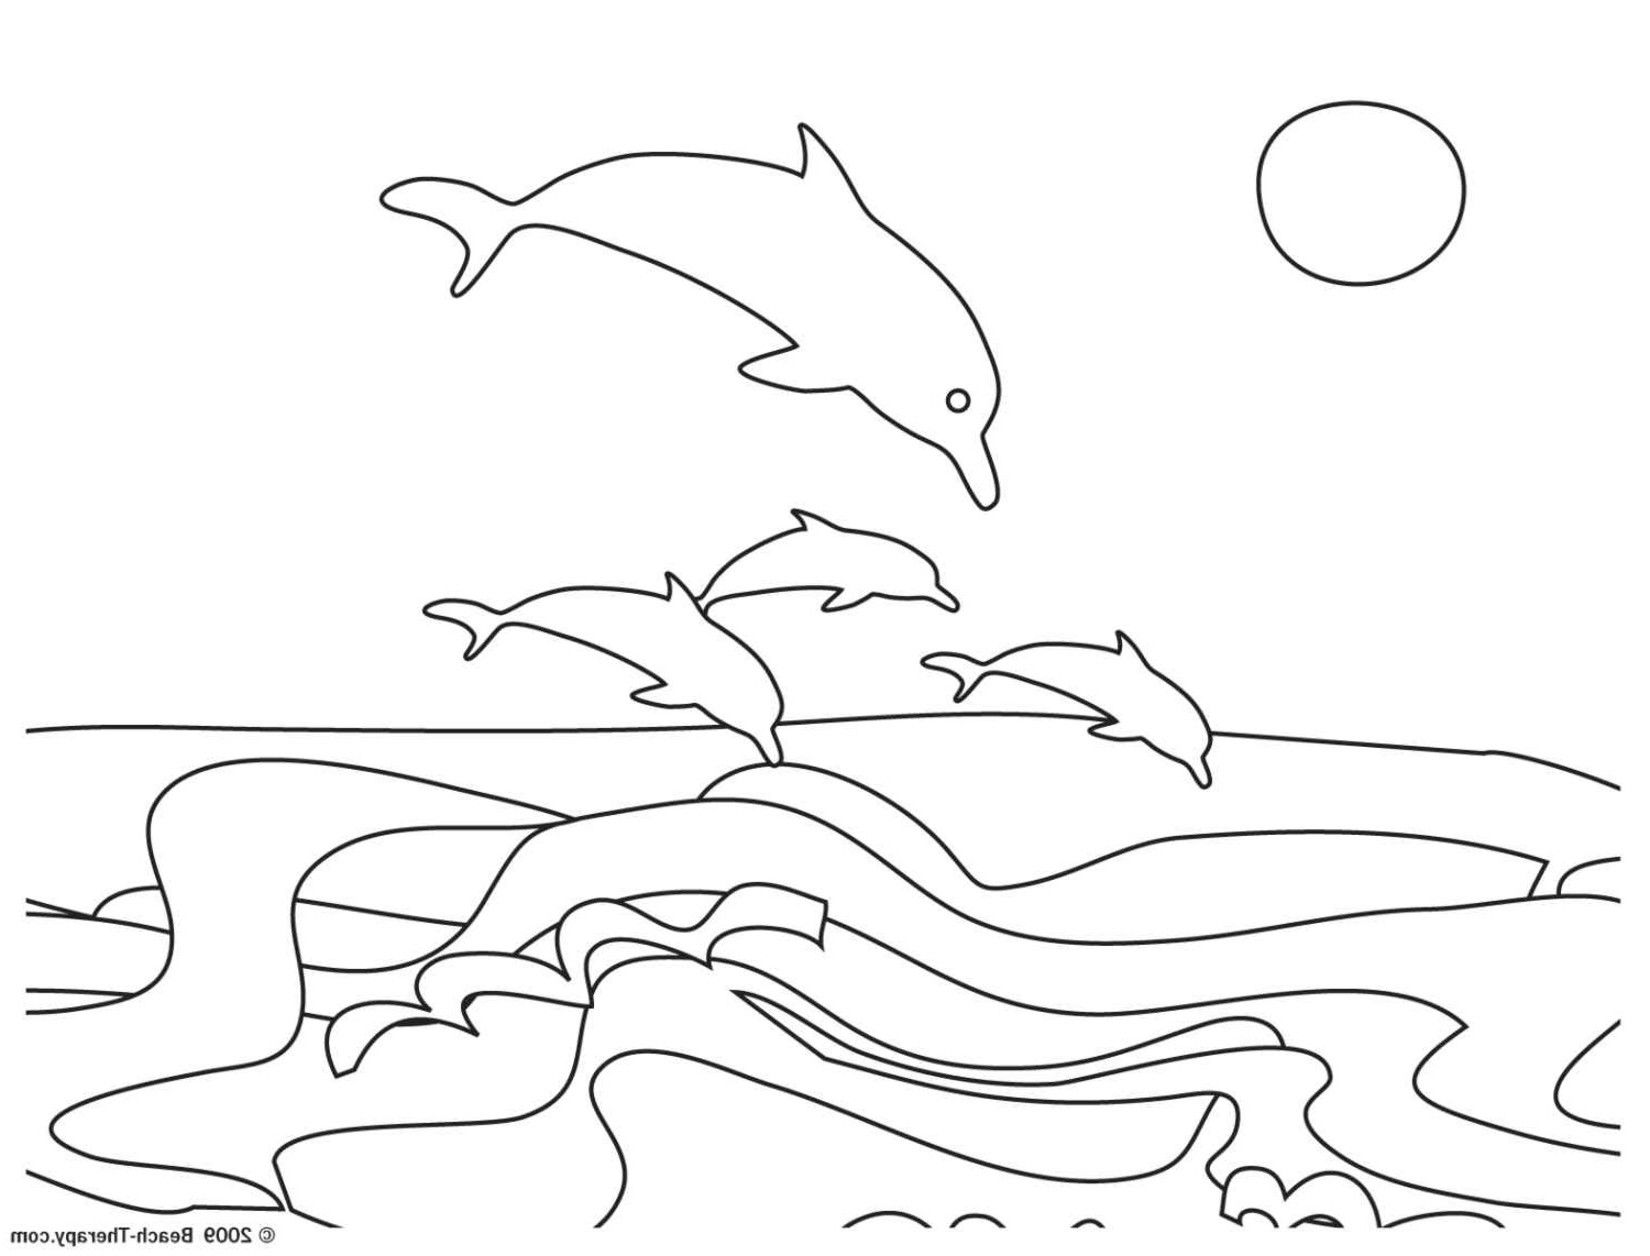 Bunny Beach Coloring Page - Coloring Pages For All Ages